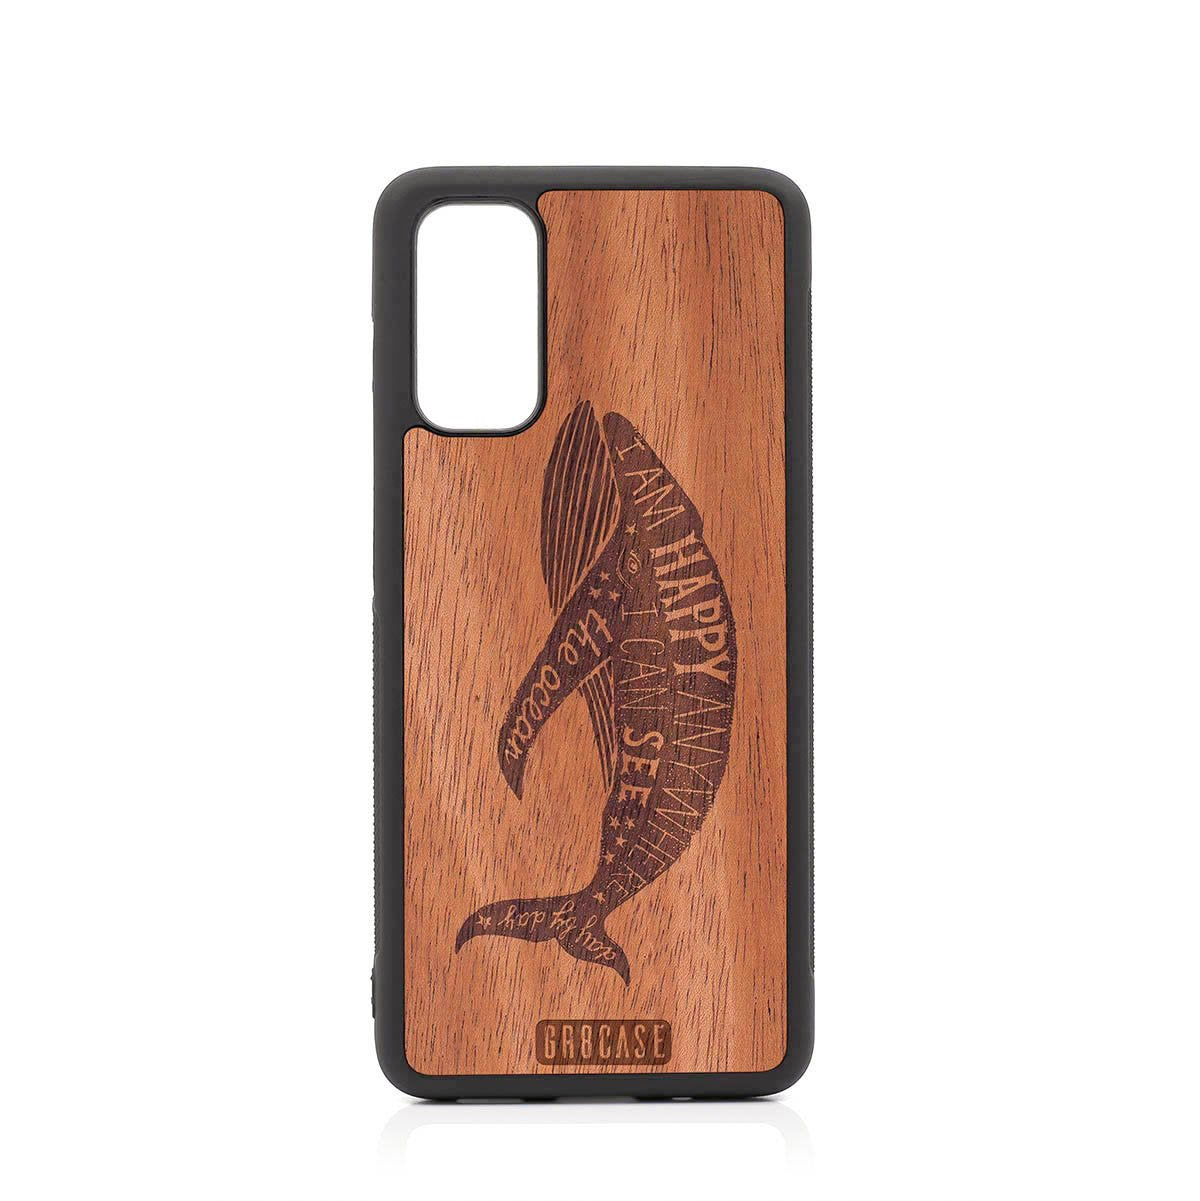 I'm Happy Anywhere I Can See The Ocean (Whale) Design Wood Case For Samsung Galaxy S20 FE 5G